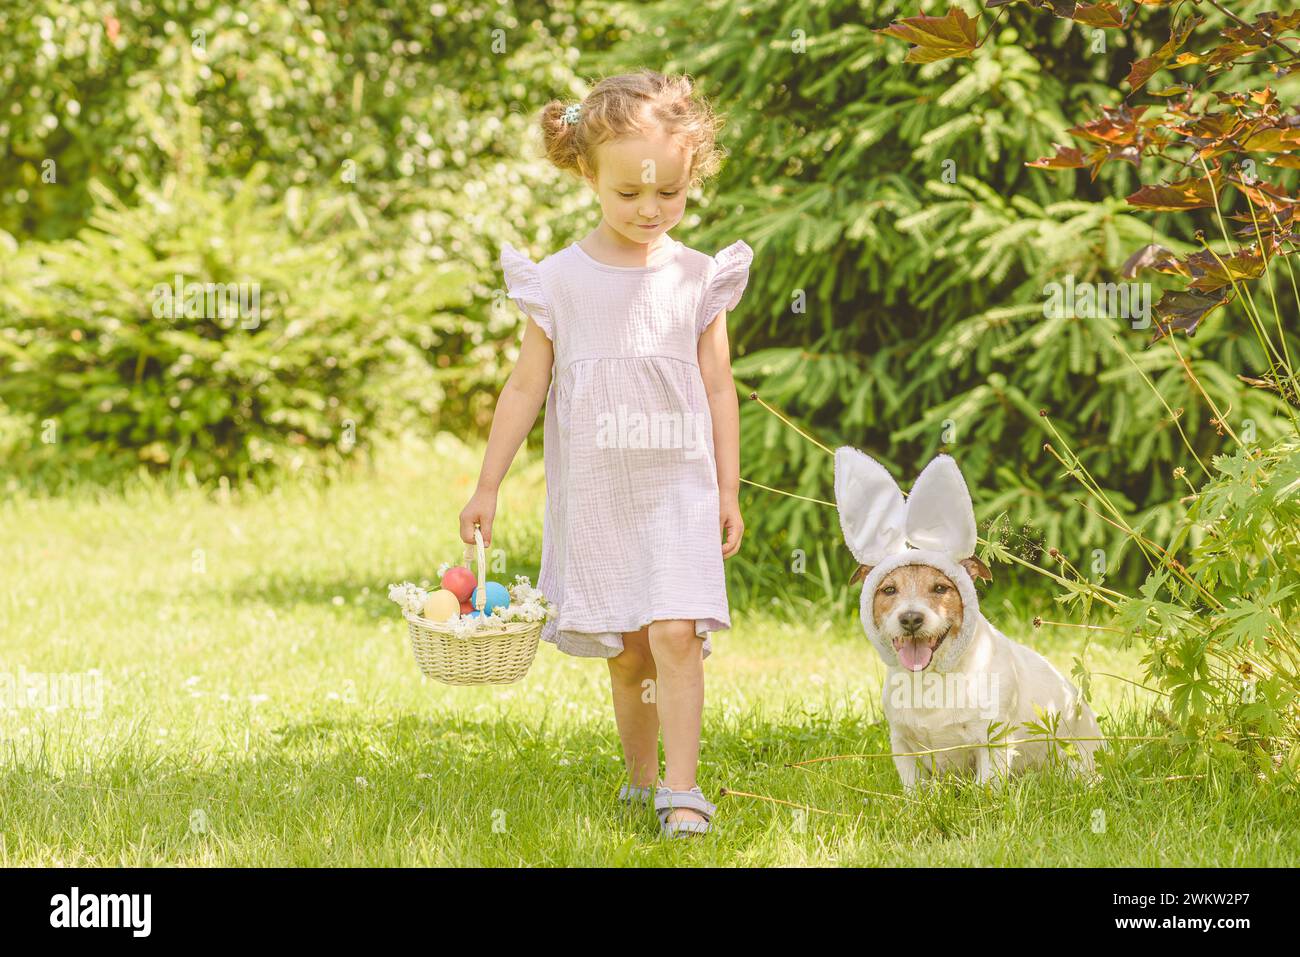 Family Easter egg hunt. Girl and dog gather colorful eggs in bascket Stock Photo